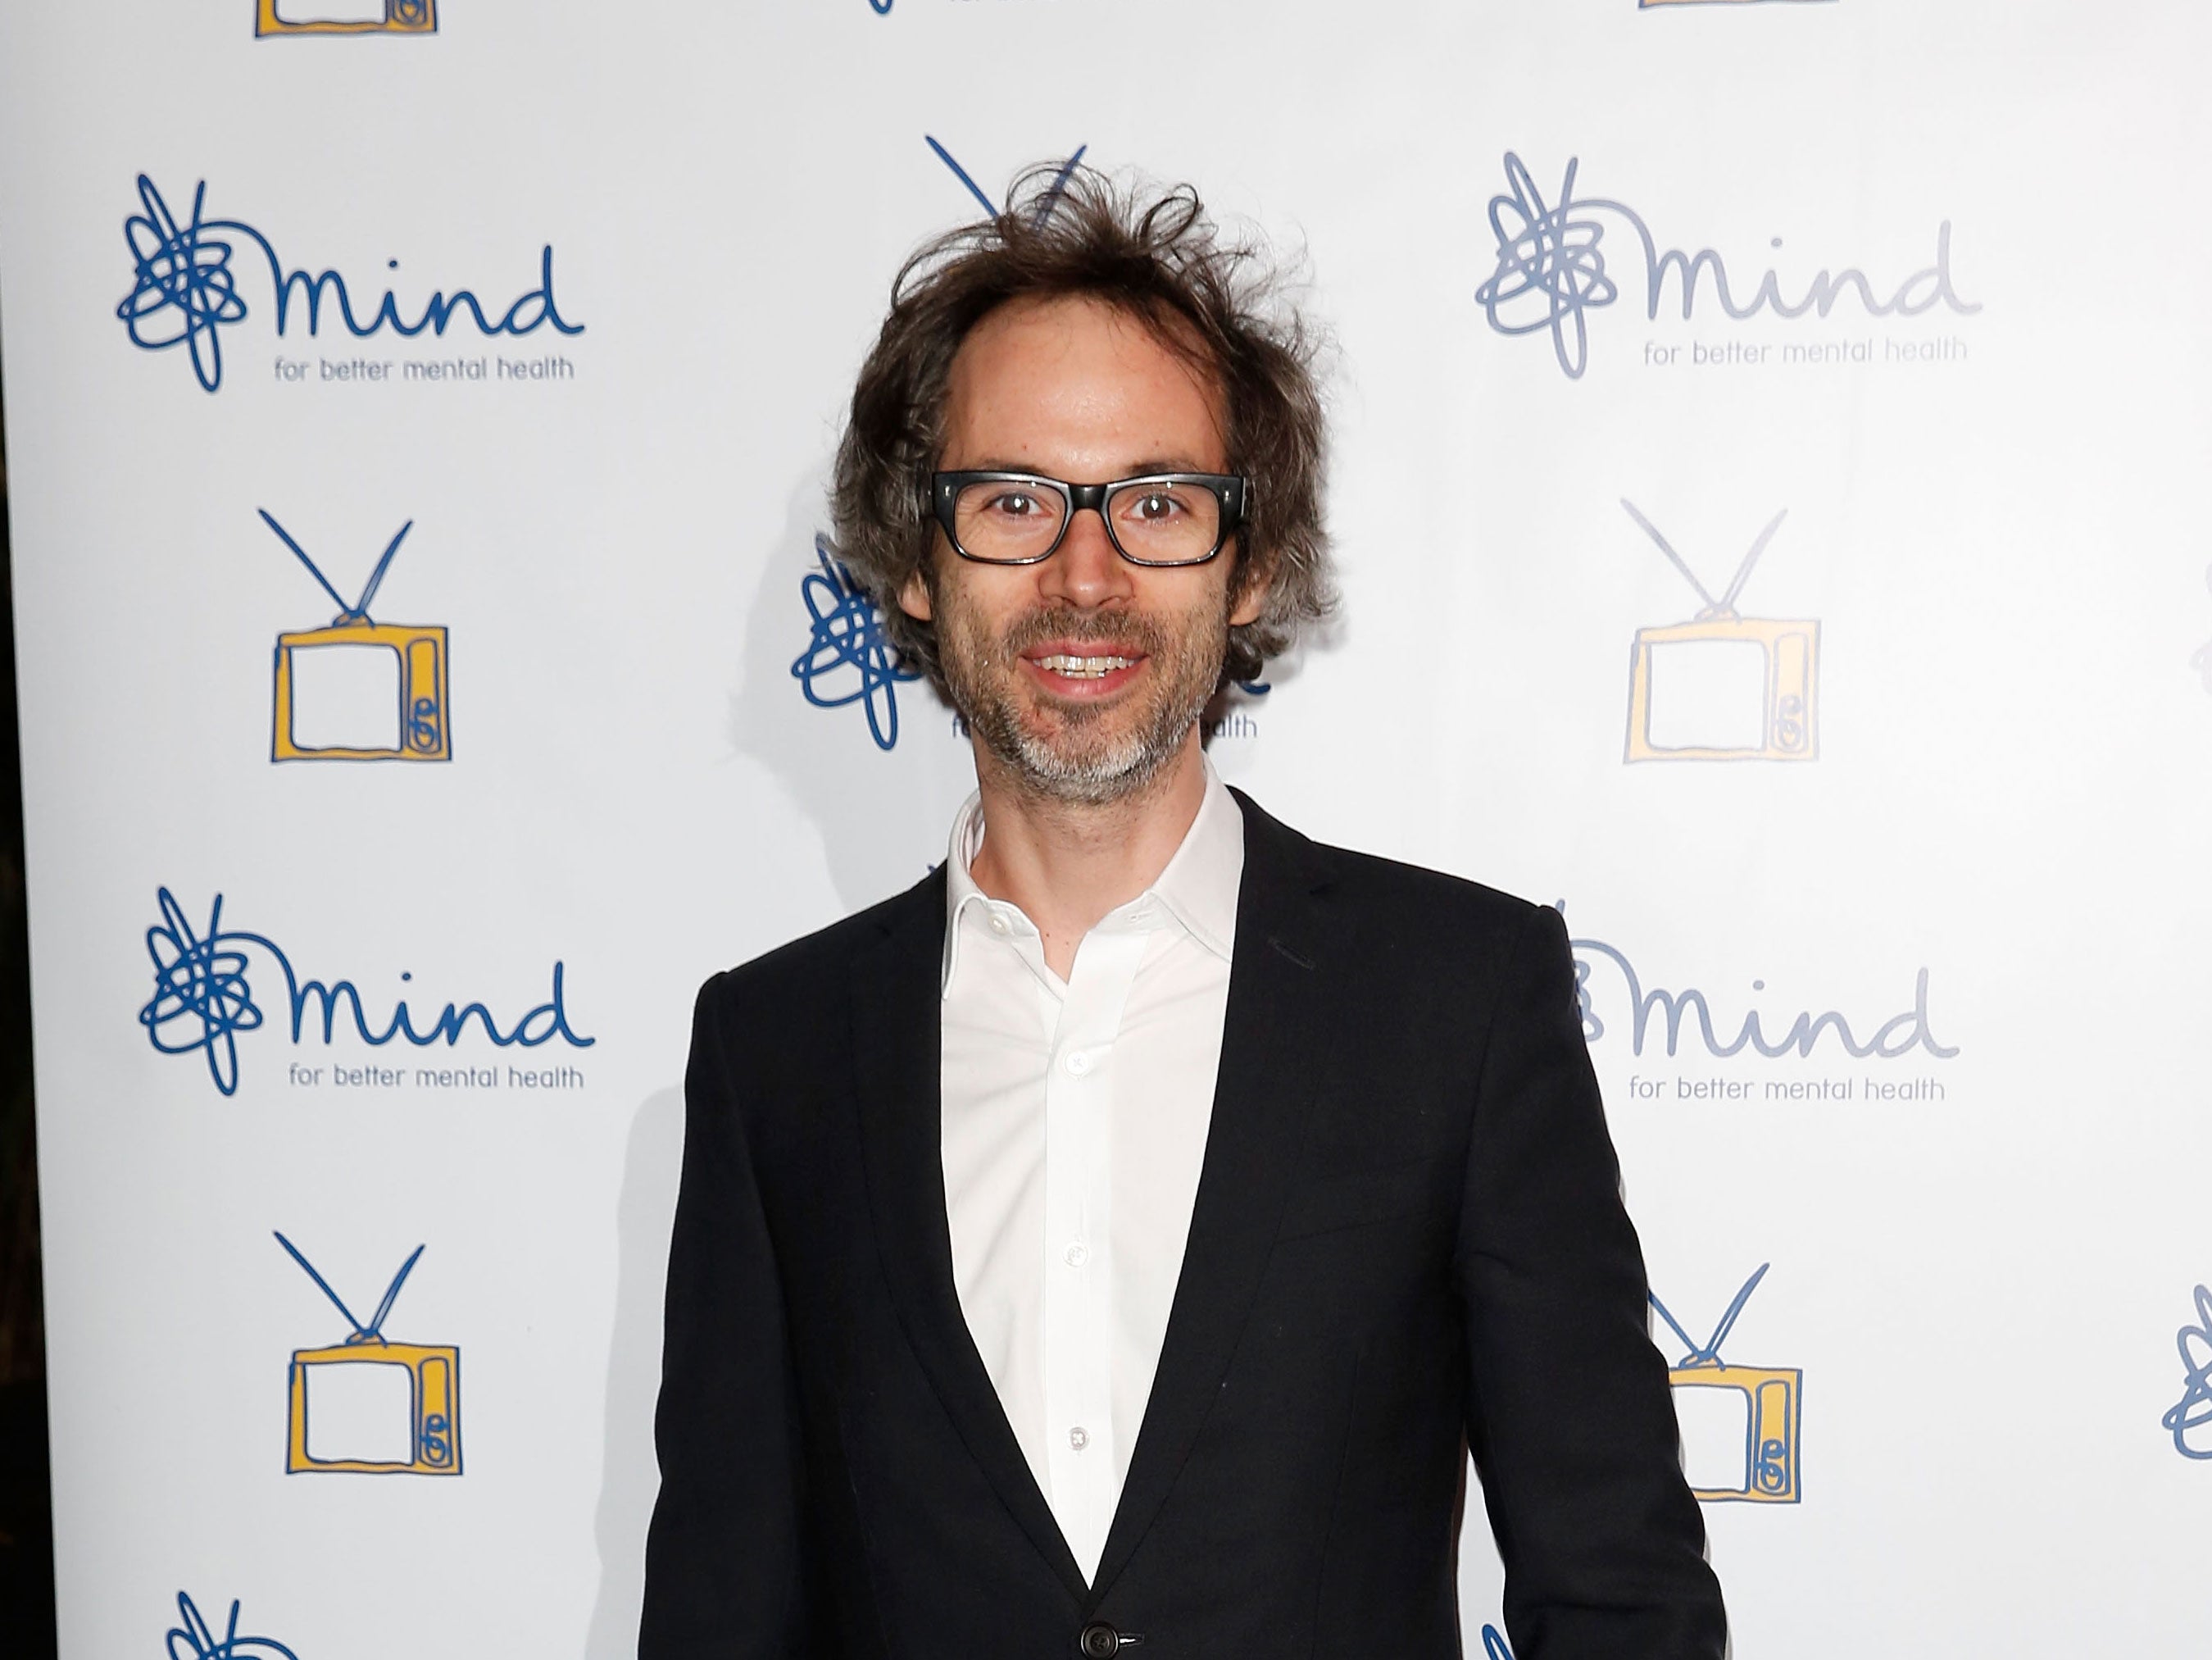 Pianist James Rhodes spoke to Channel 4 News about his experiences